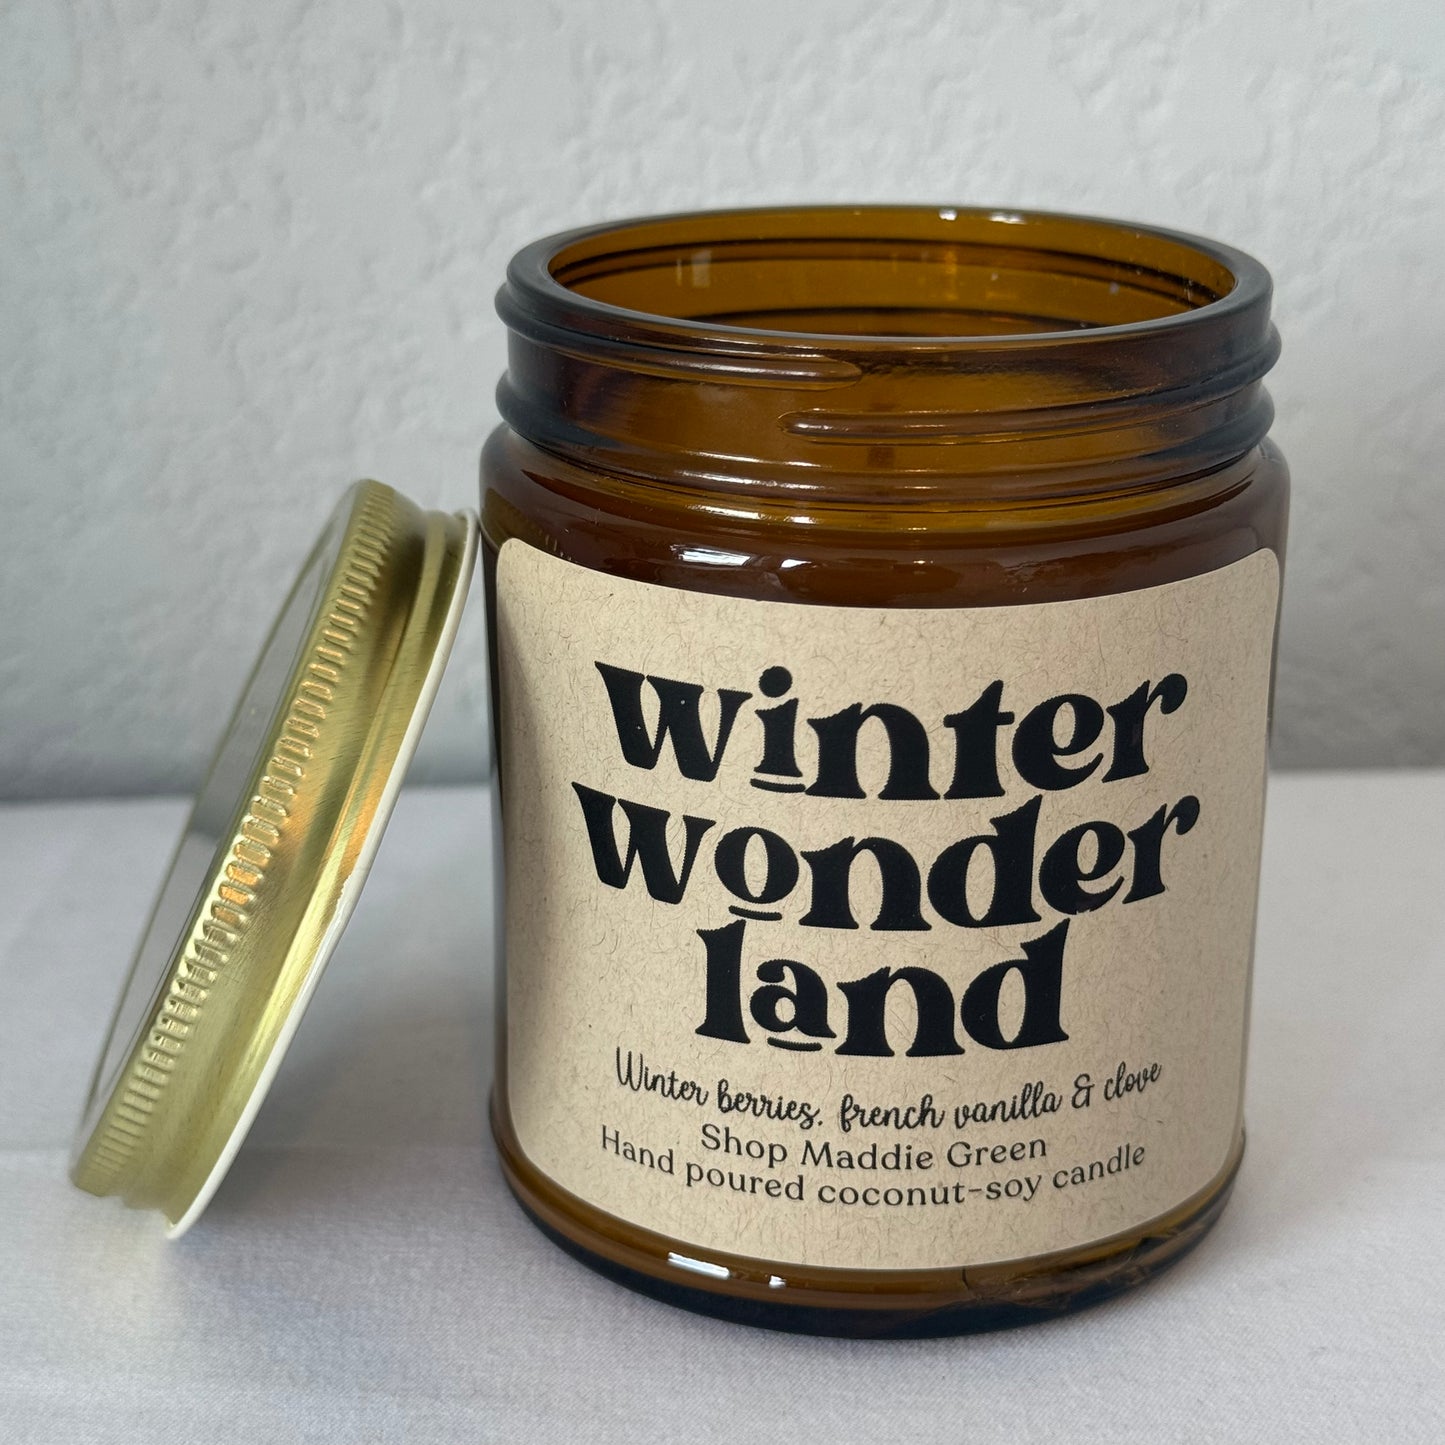 Winter Soy Candles